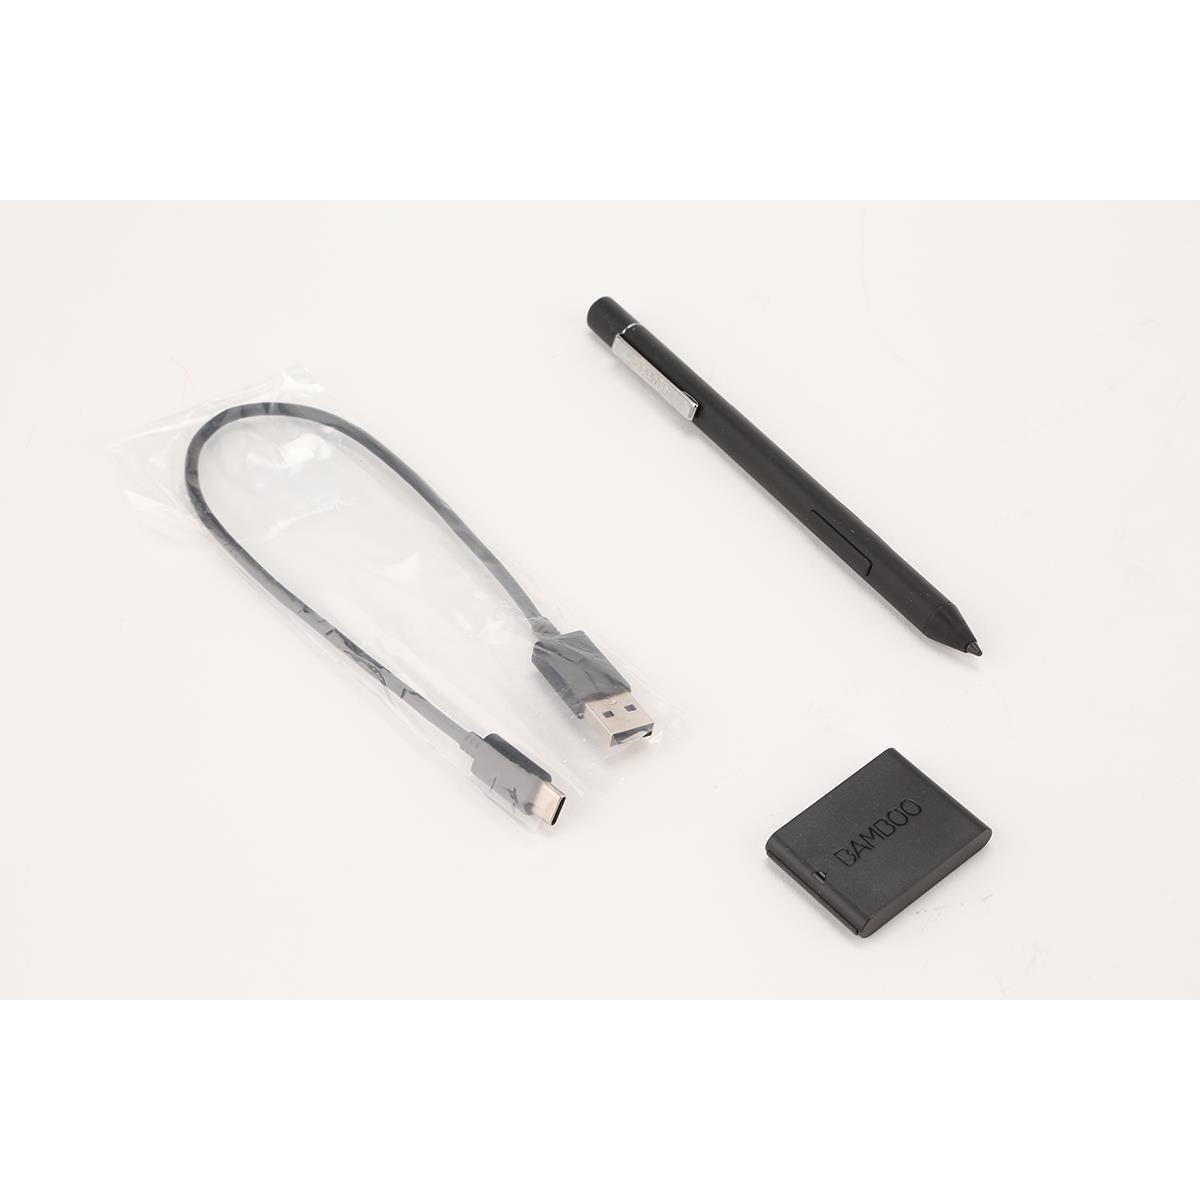 Wacom Bamboo Ink Plus Smart Stylus for Windows Ink Enabled 2-in-1 Devices